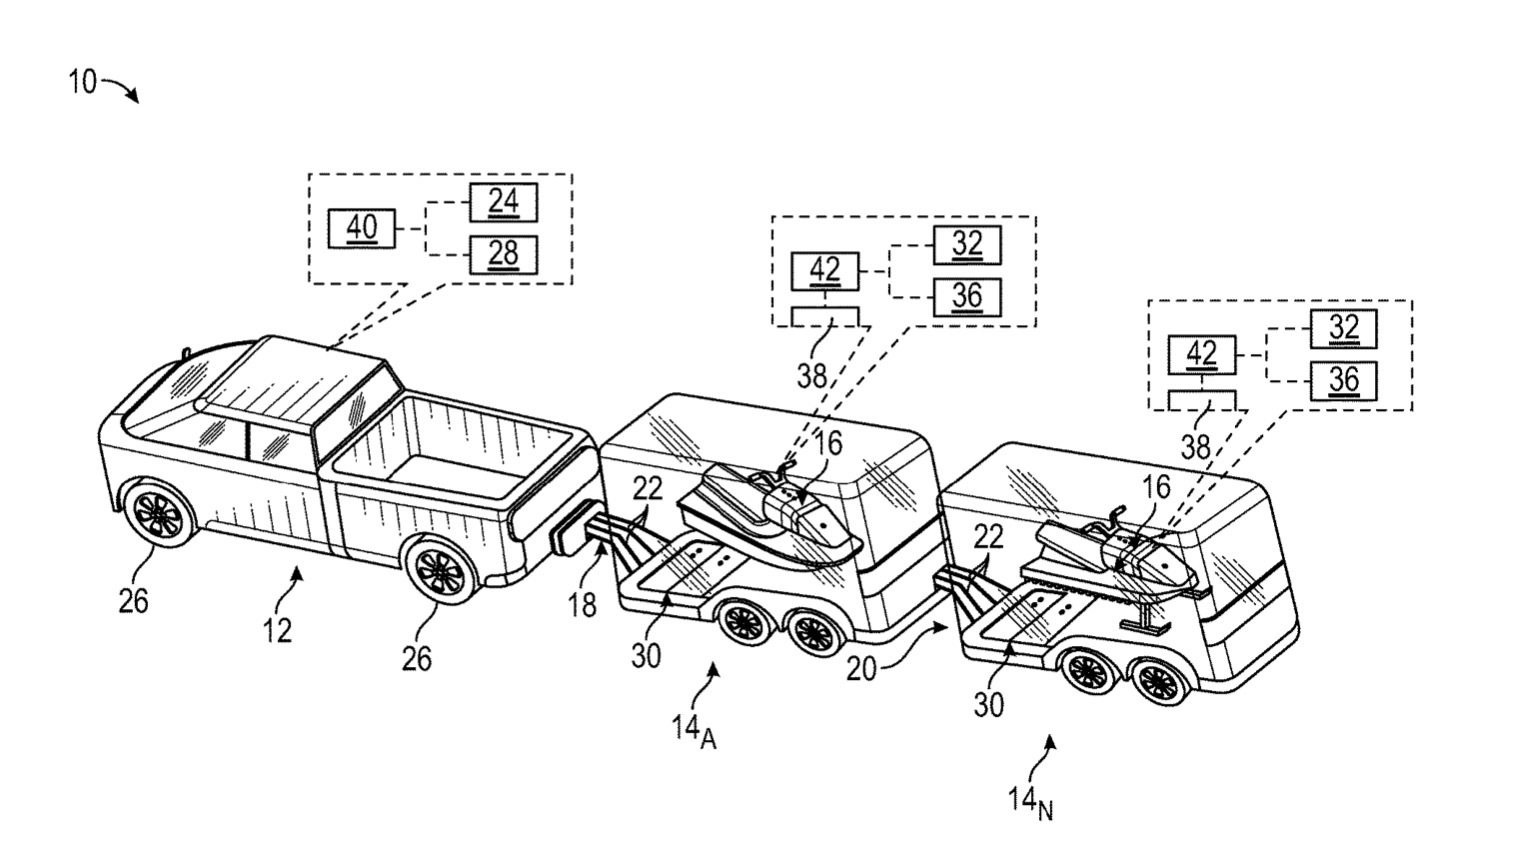 Ford trailer bidirectional charging patent image